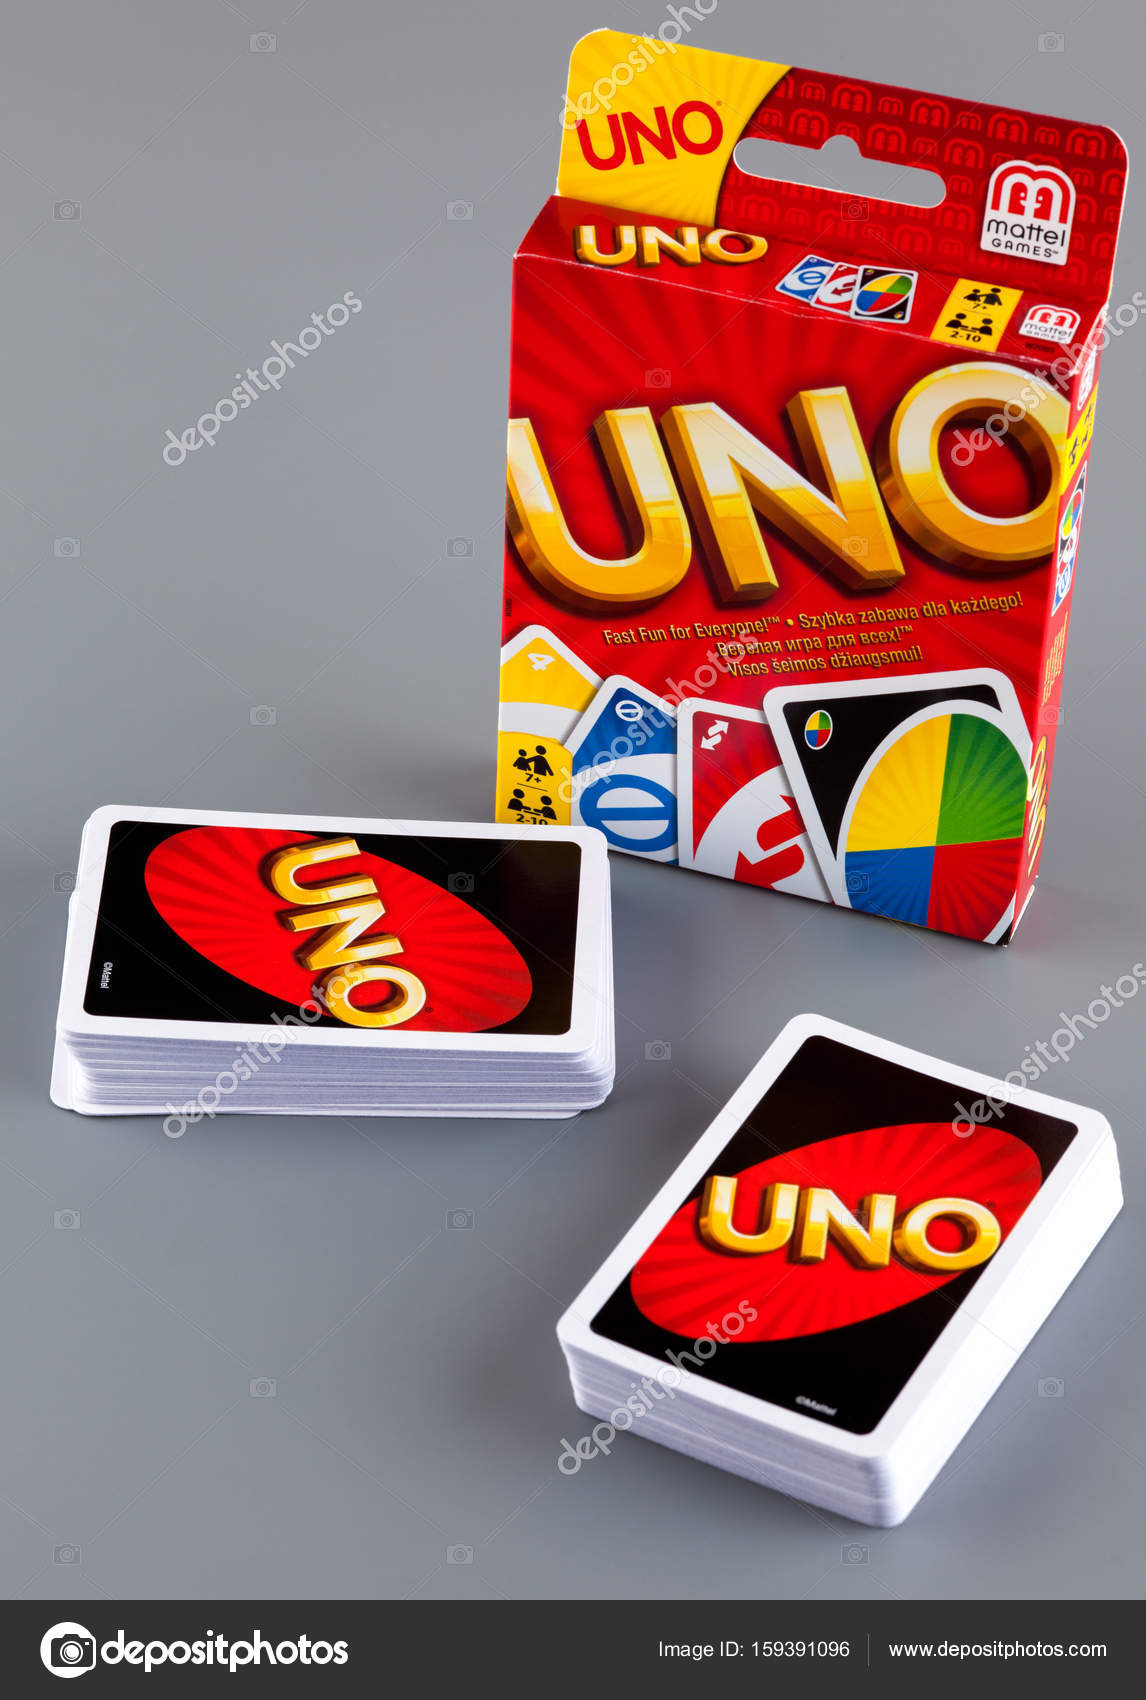 uno for free online